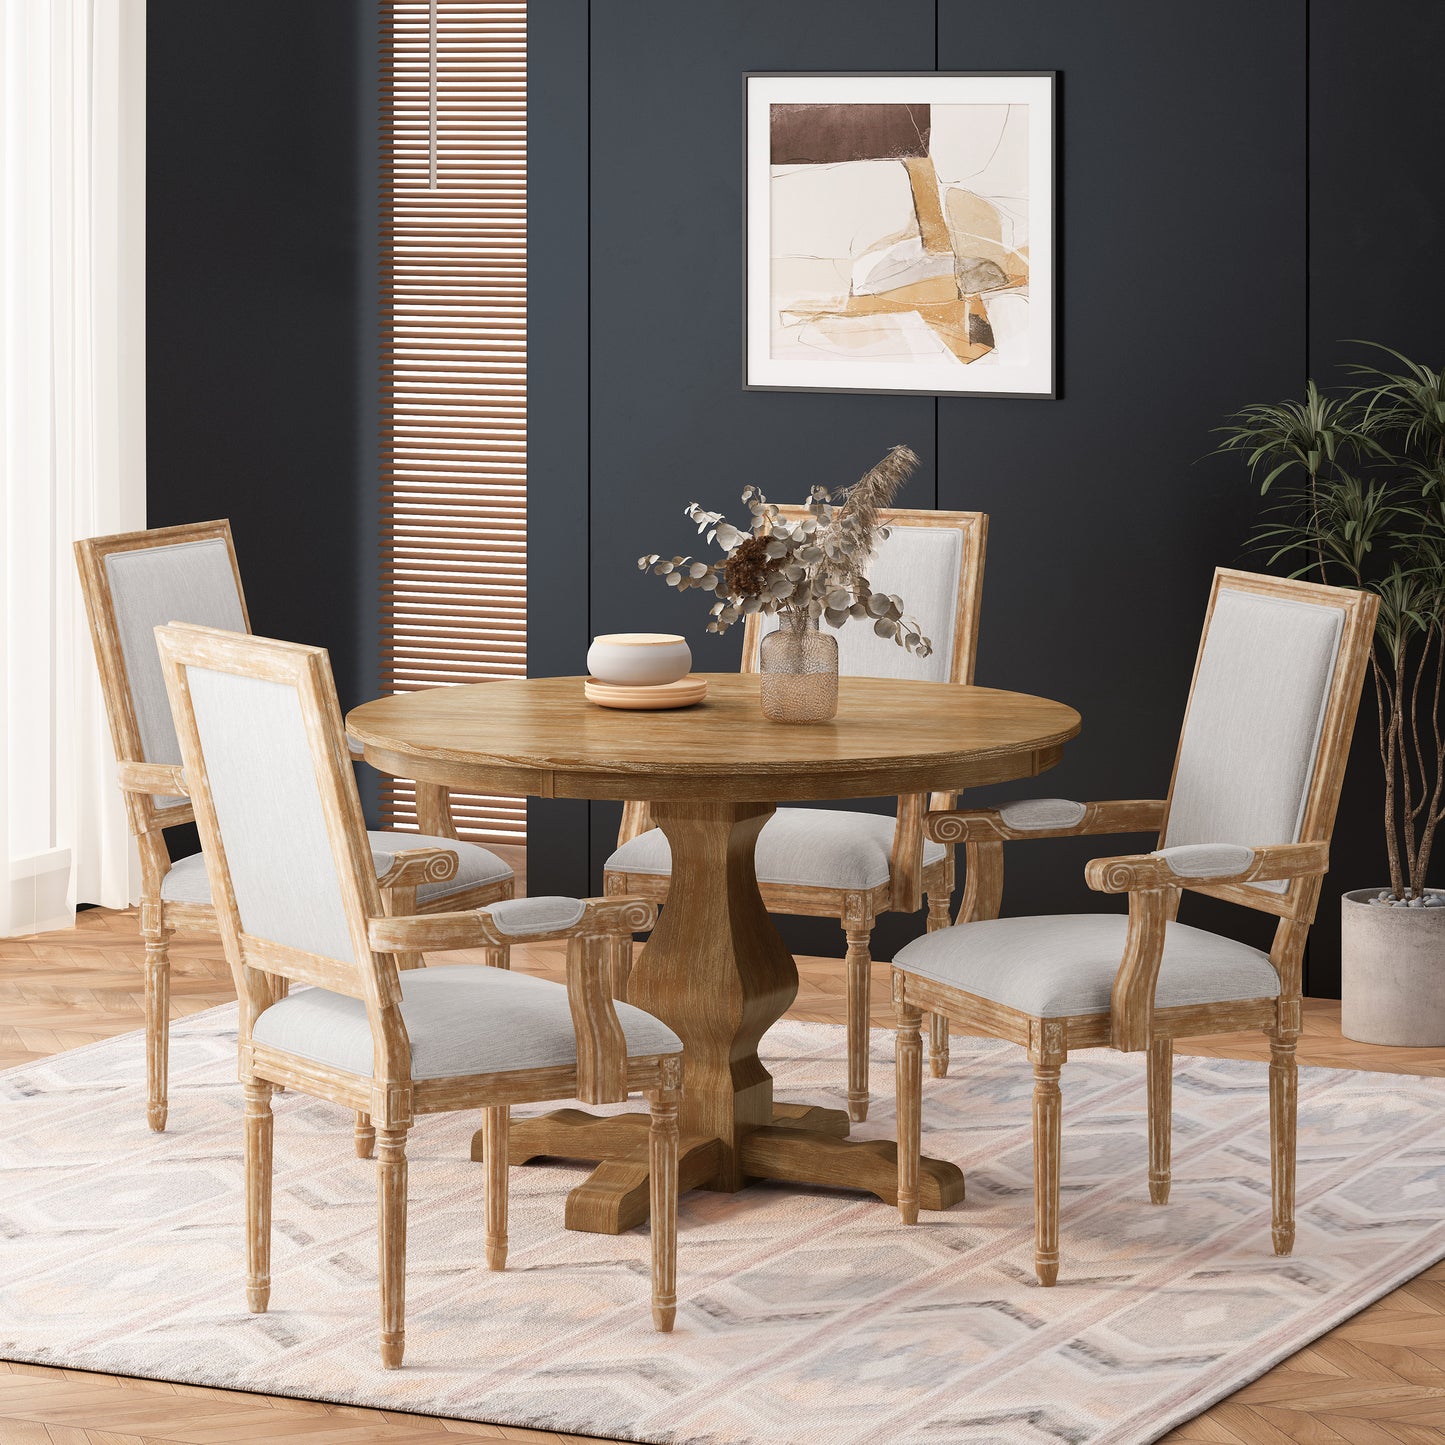 Joretta French Country Fabric Upholstered Wood 5 Piece Circular Dining Set